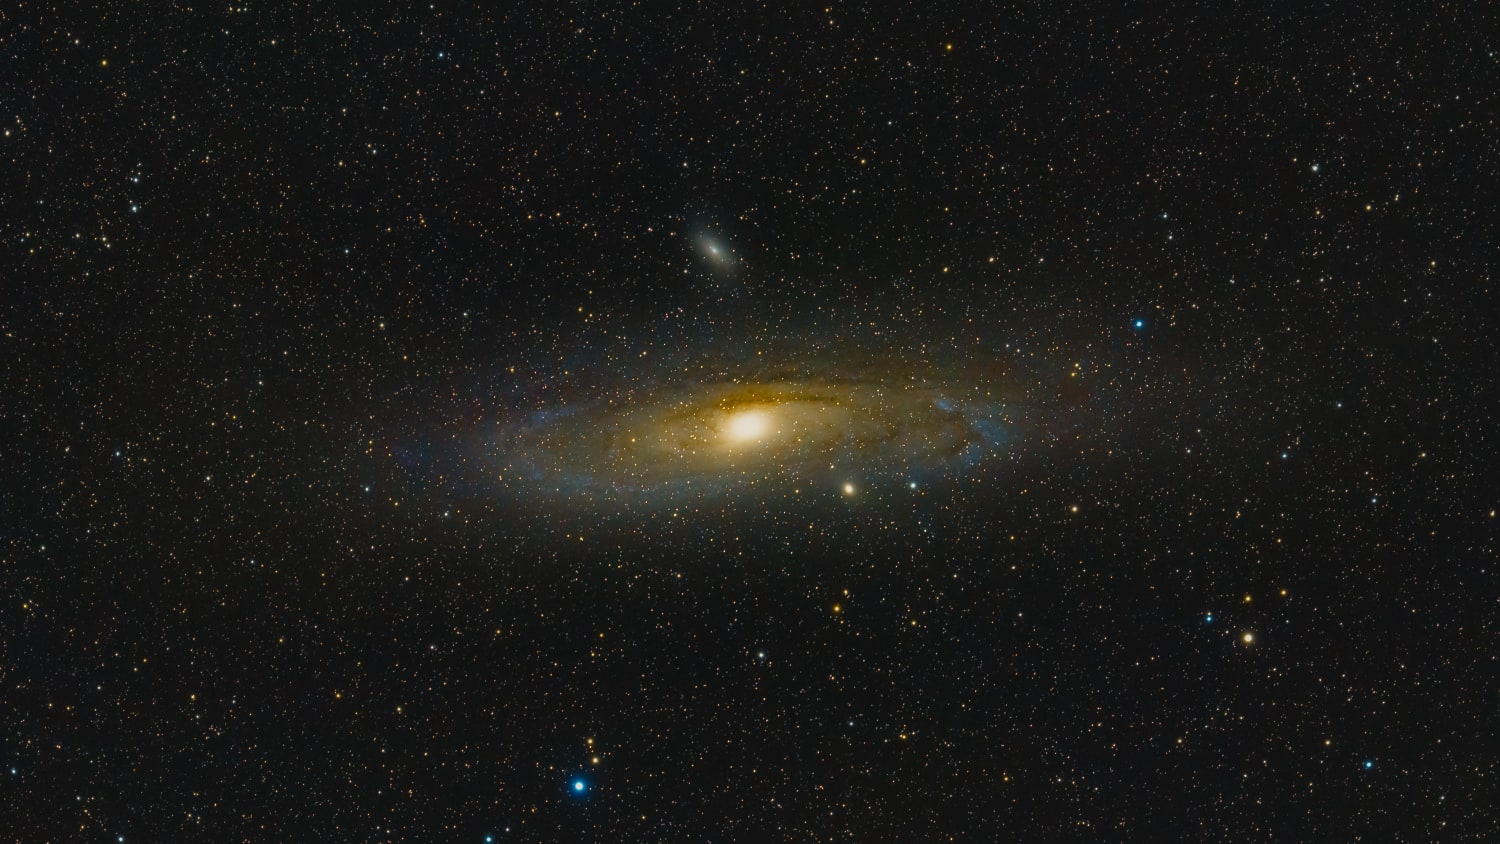 M31 - Andromeda Galaxy with M110 and M32